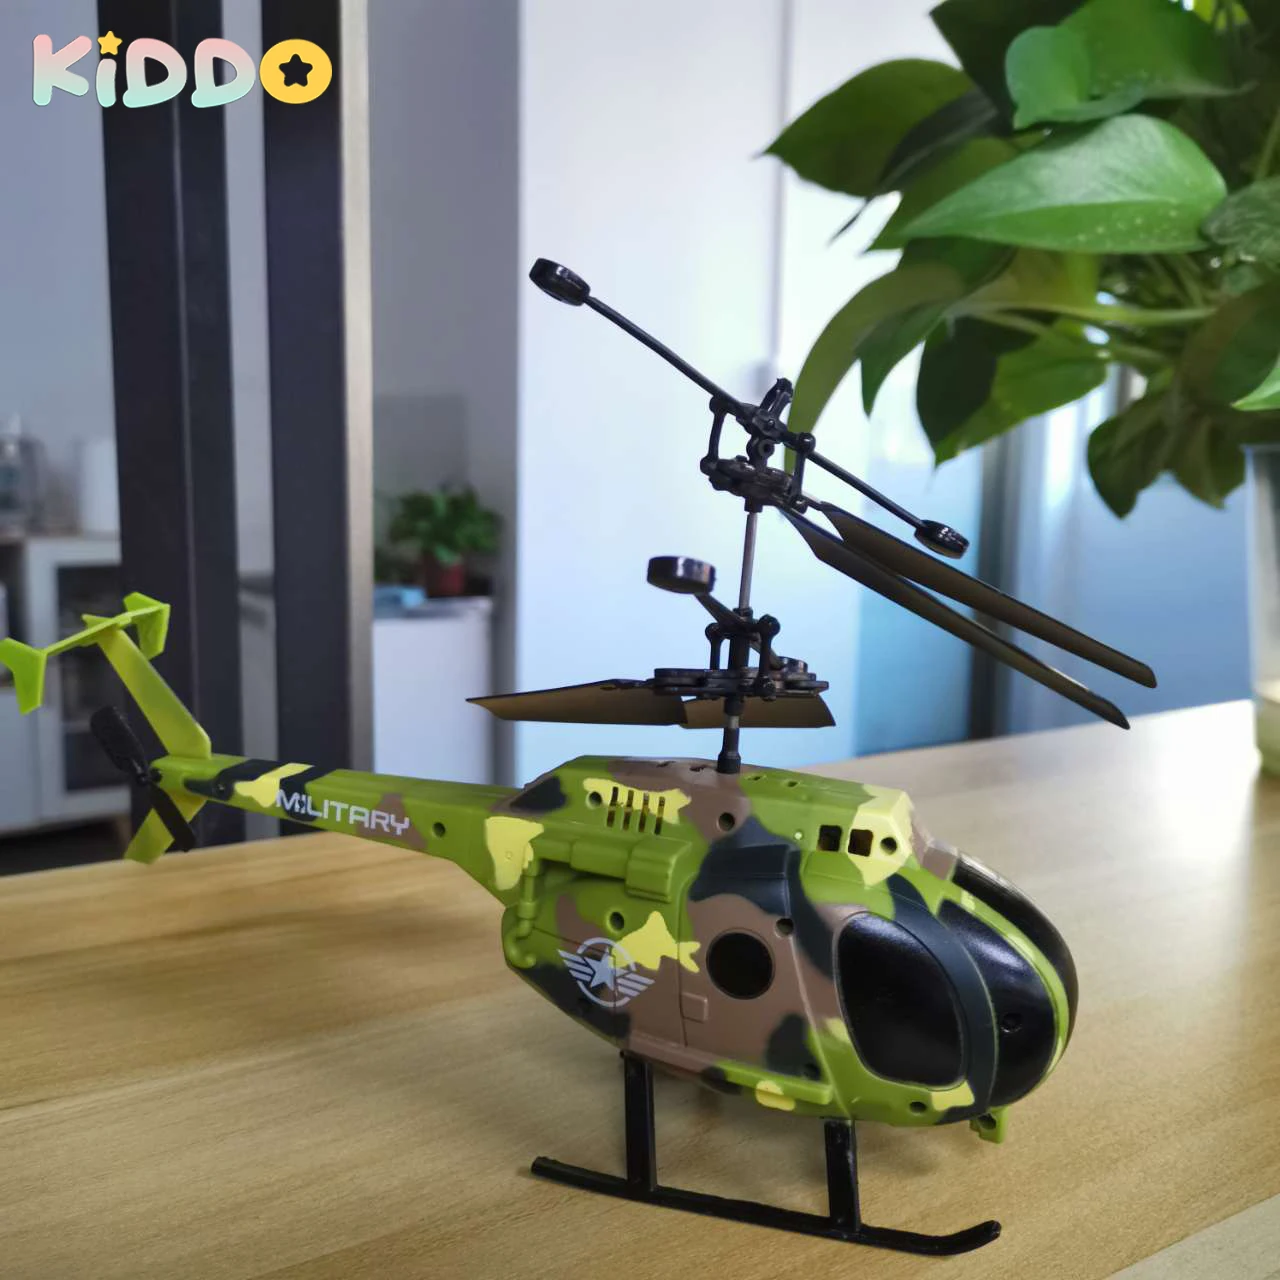 

2.4G RC Helicopter Remote Control Drone Toy Aircraft 2CH 360 Rotate USB Charge Control Drone Kid Plane Toys outdoor Flight Toys